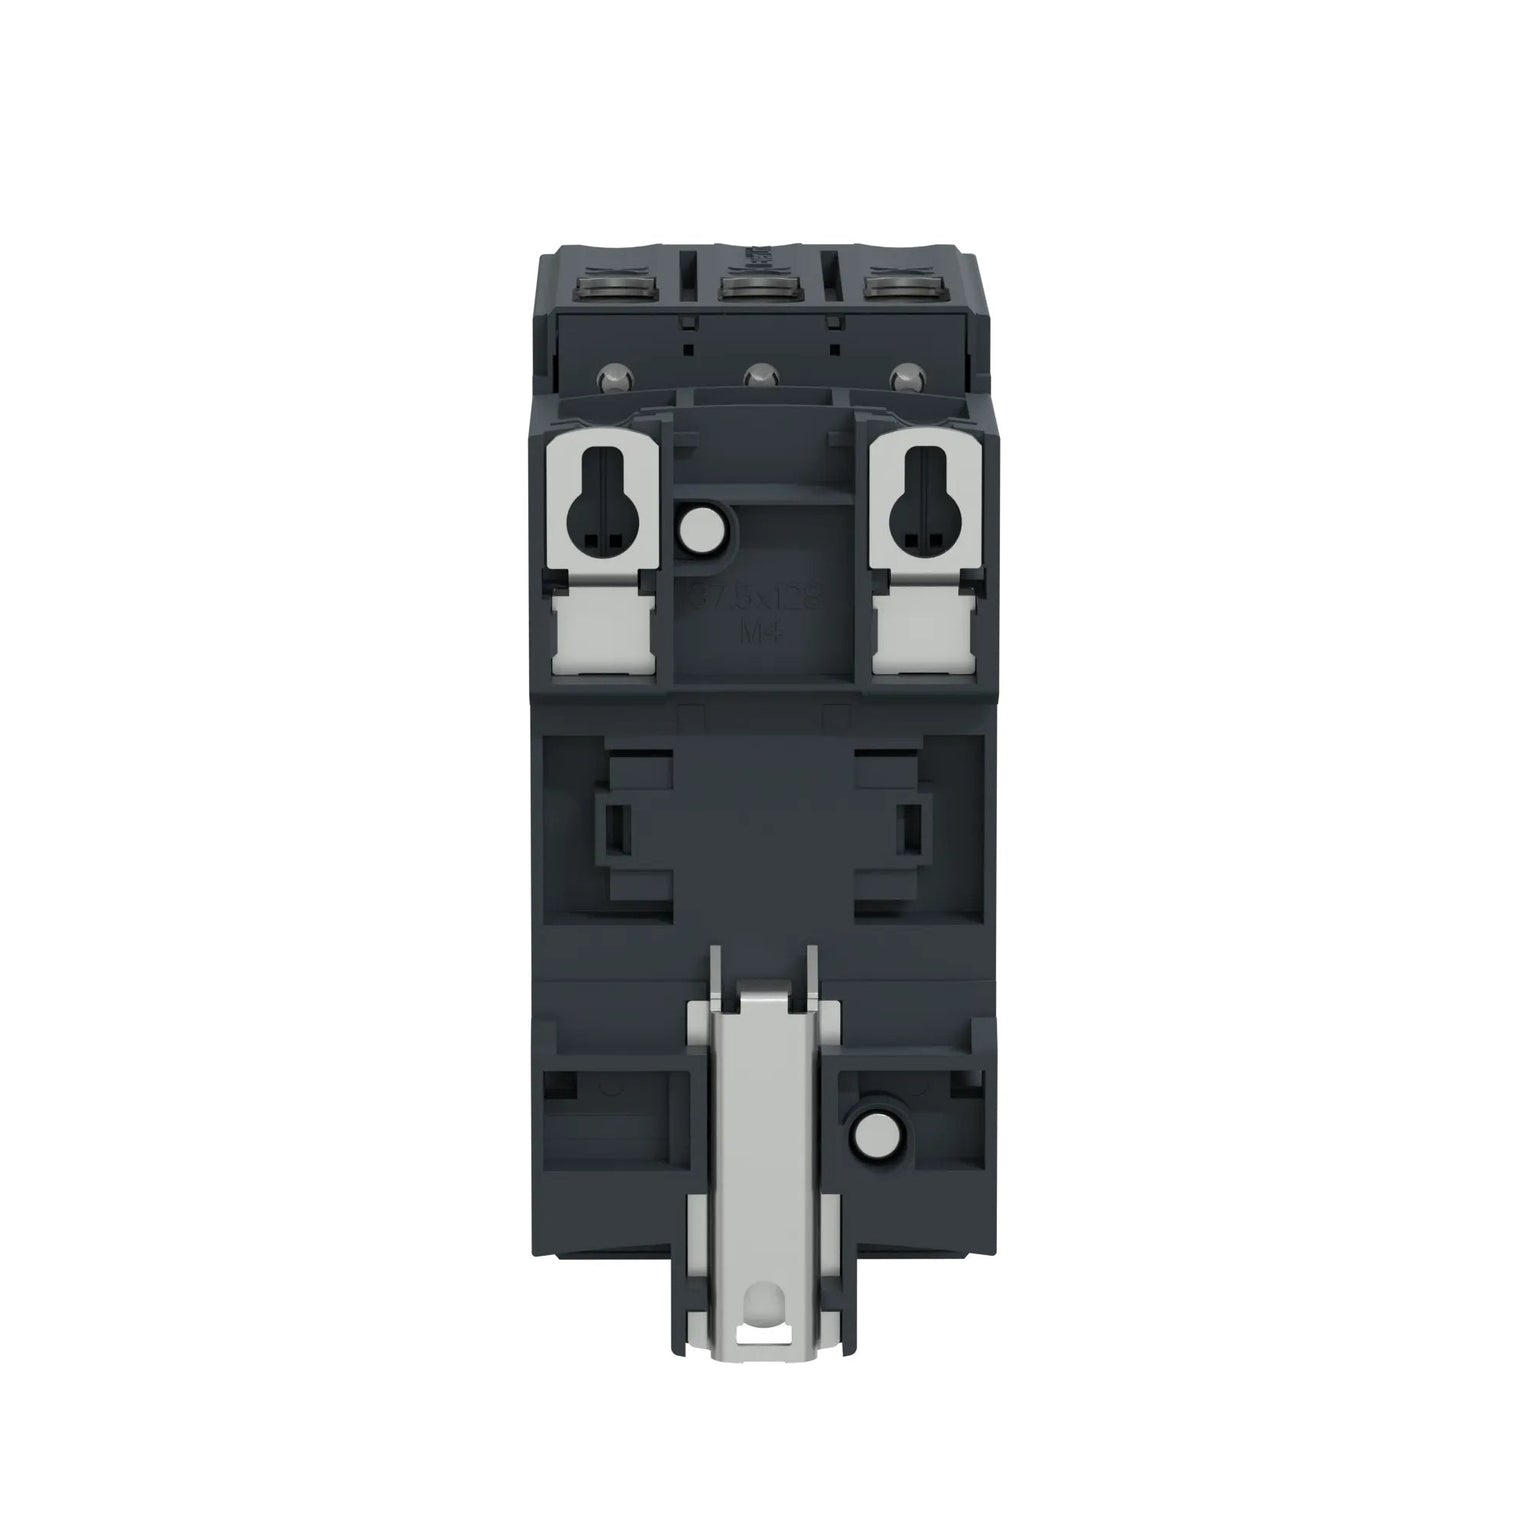 LC1D40AB7 - Square D - Contactor